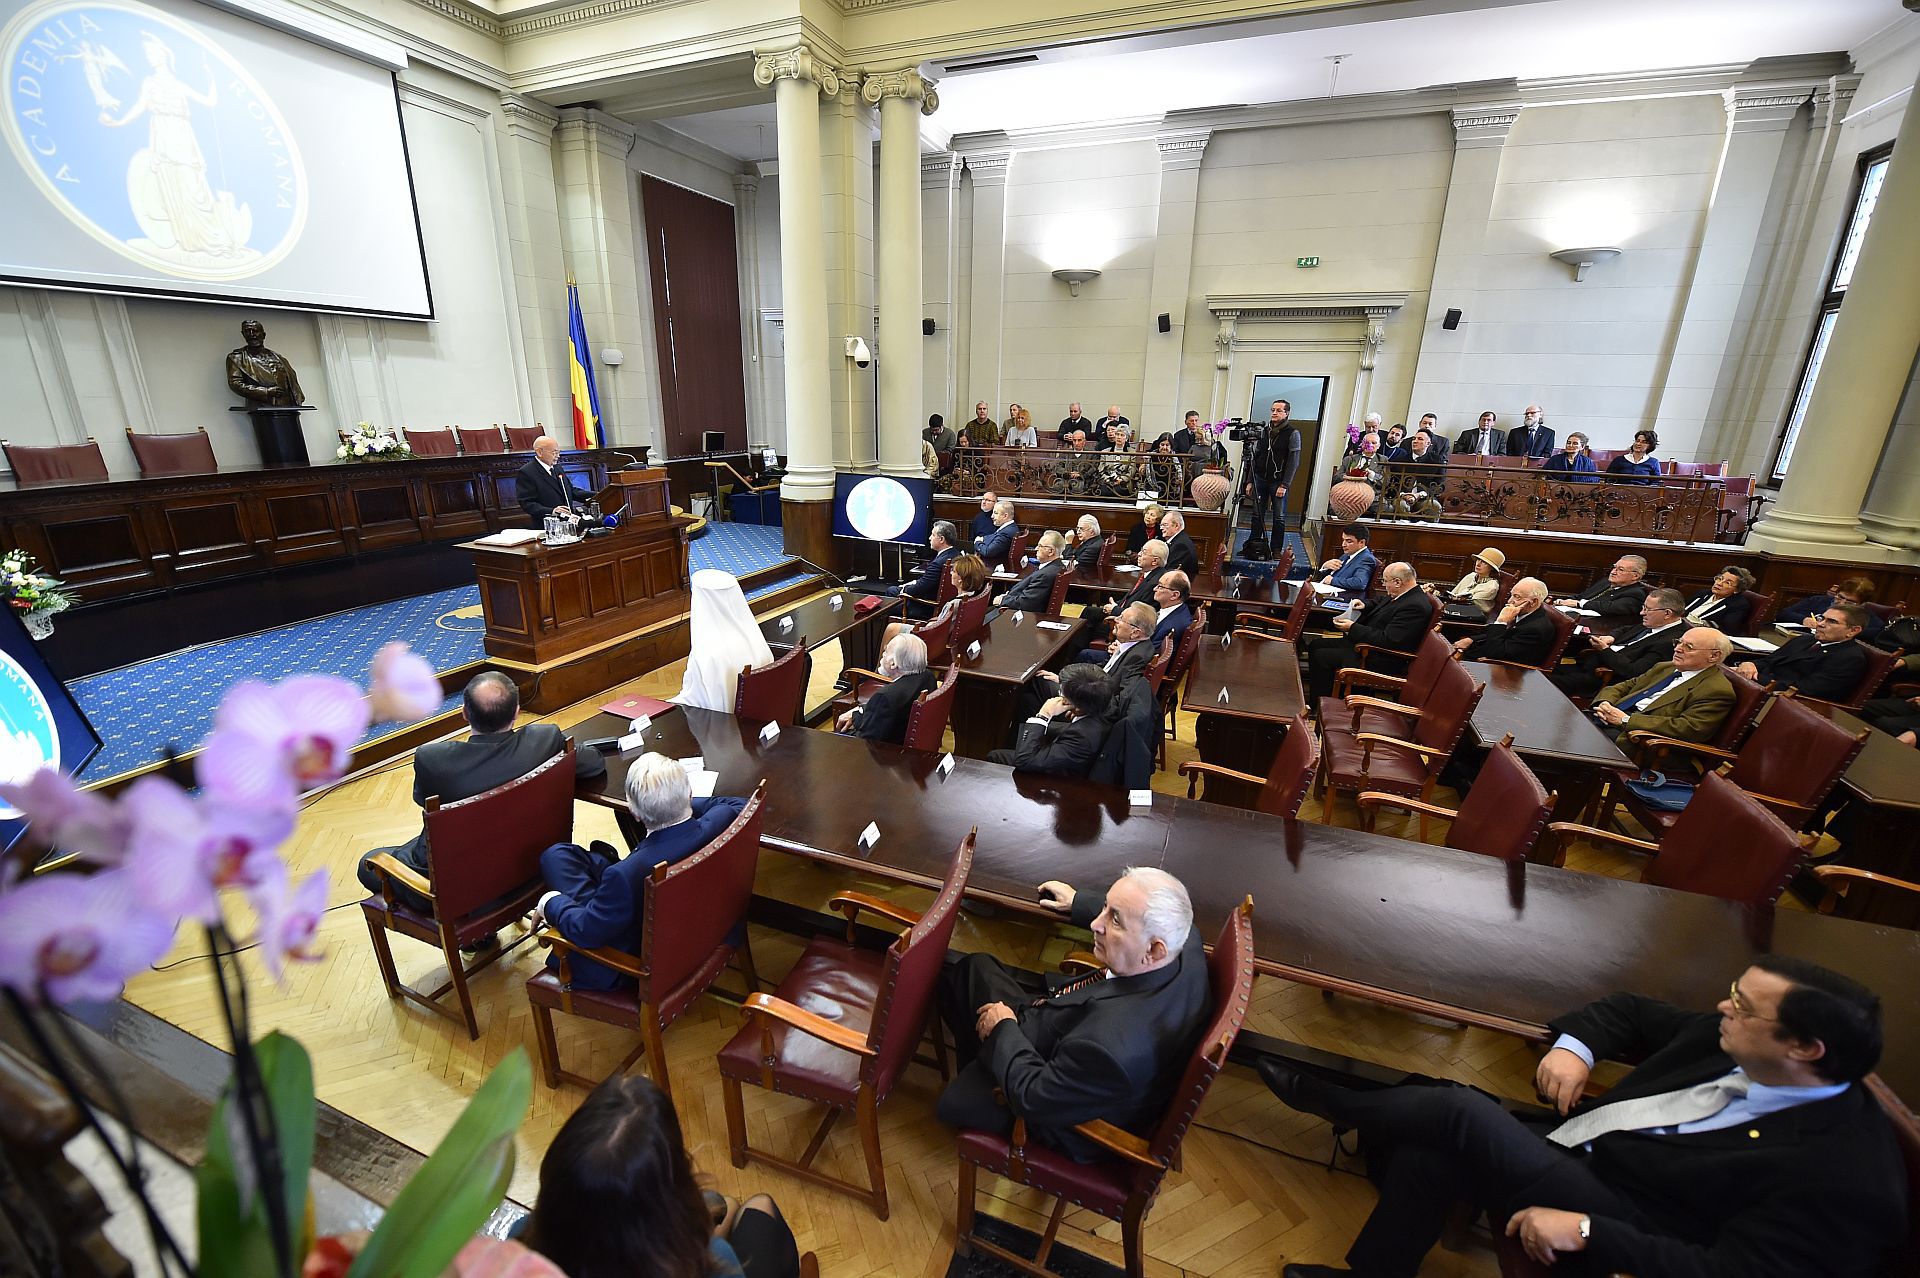 Romanian Academy hosts solemn session to celebrate the Great Union Day